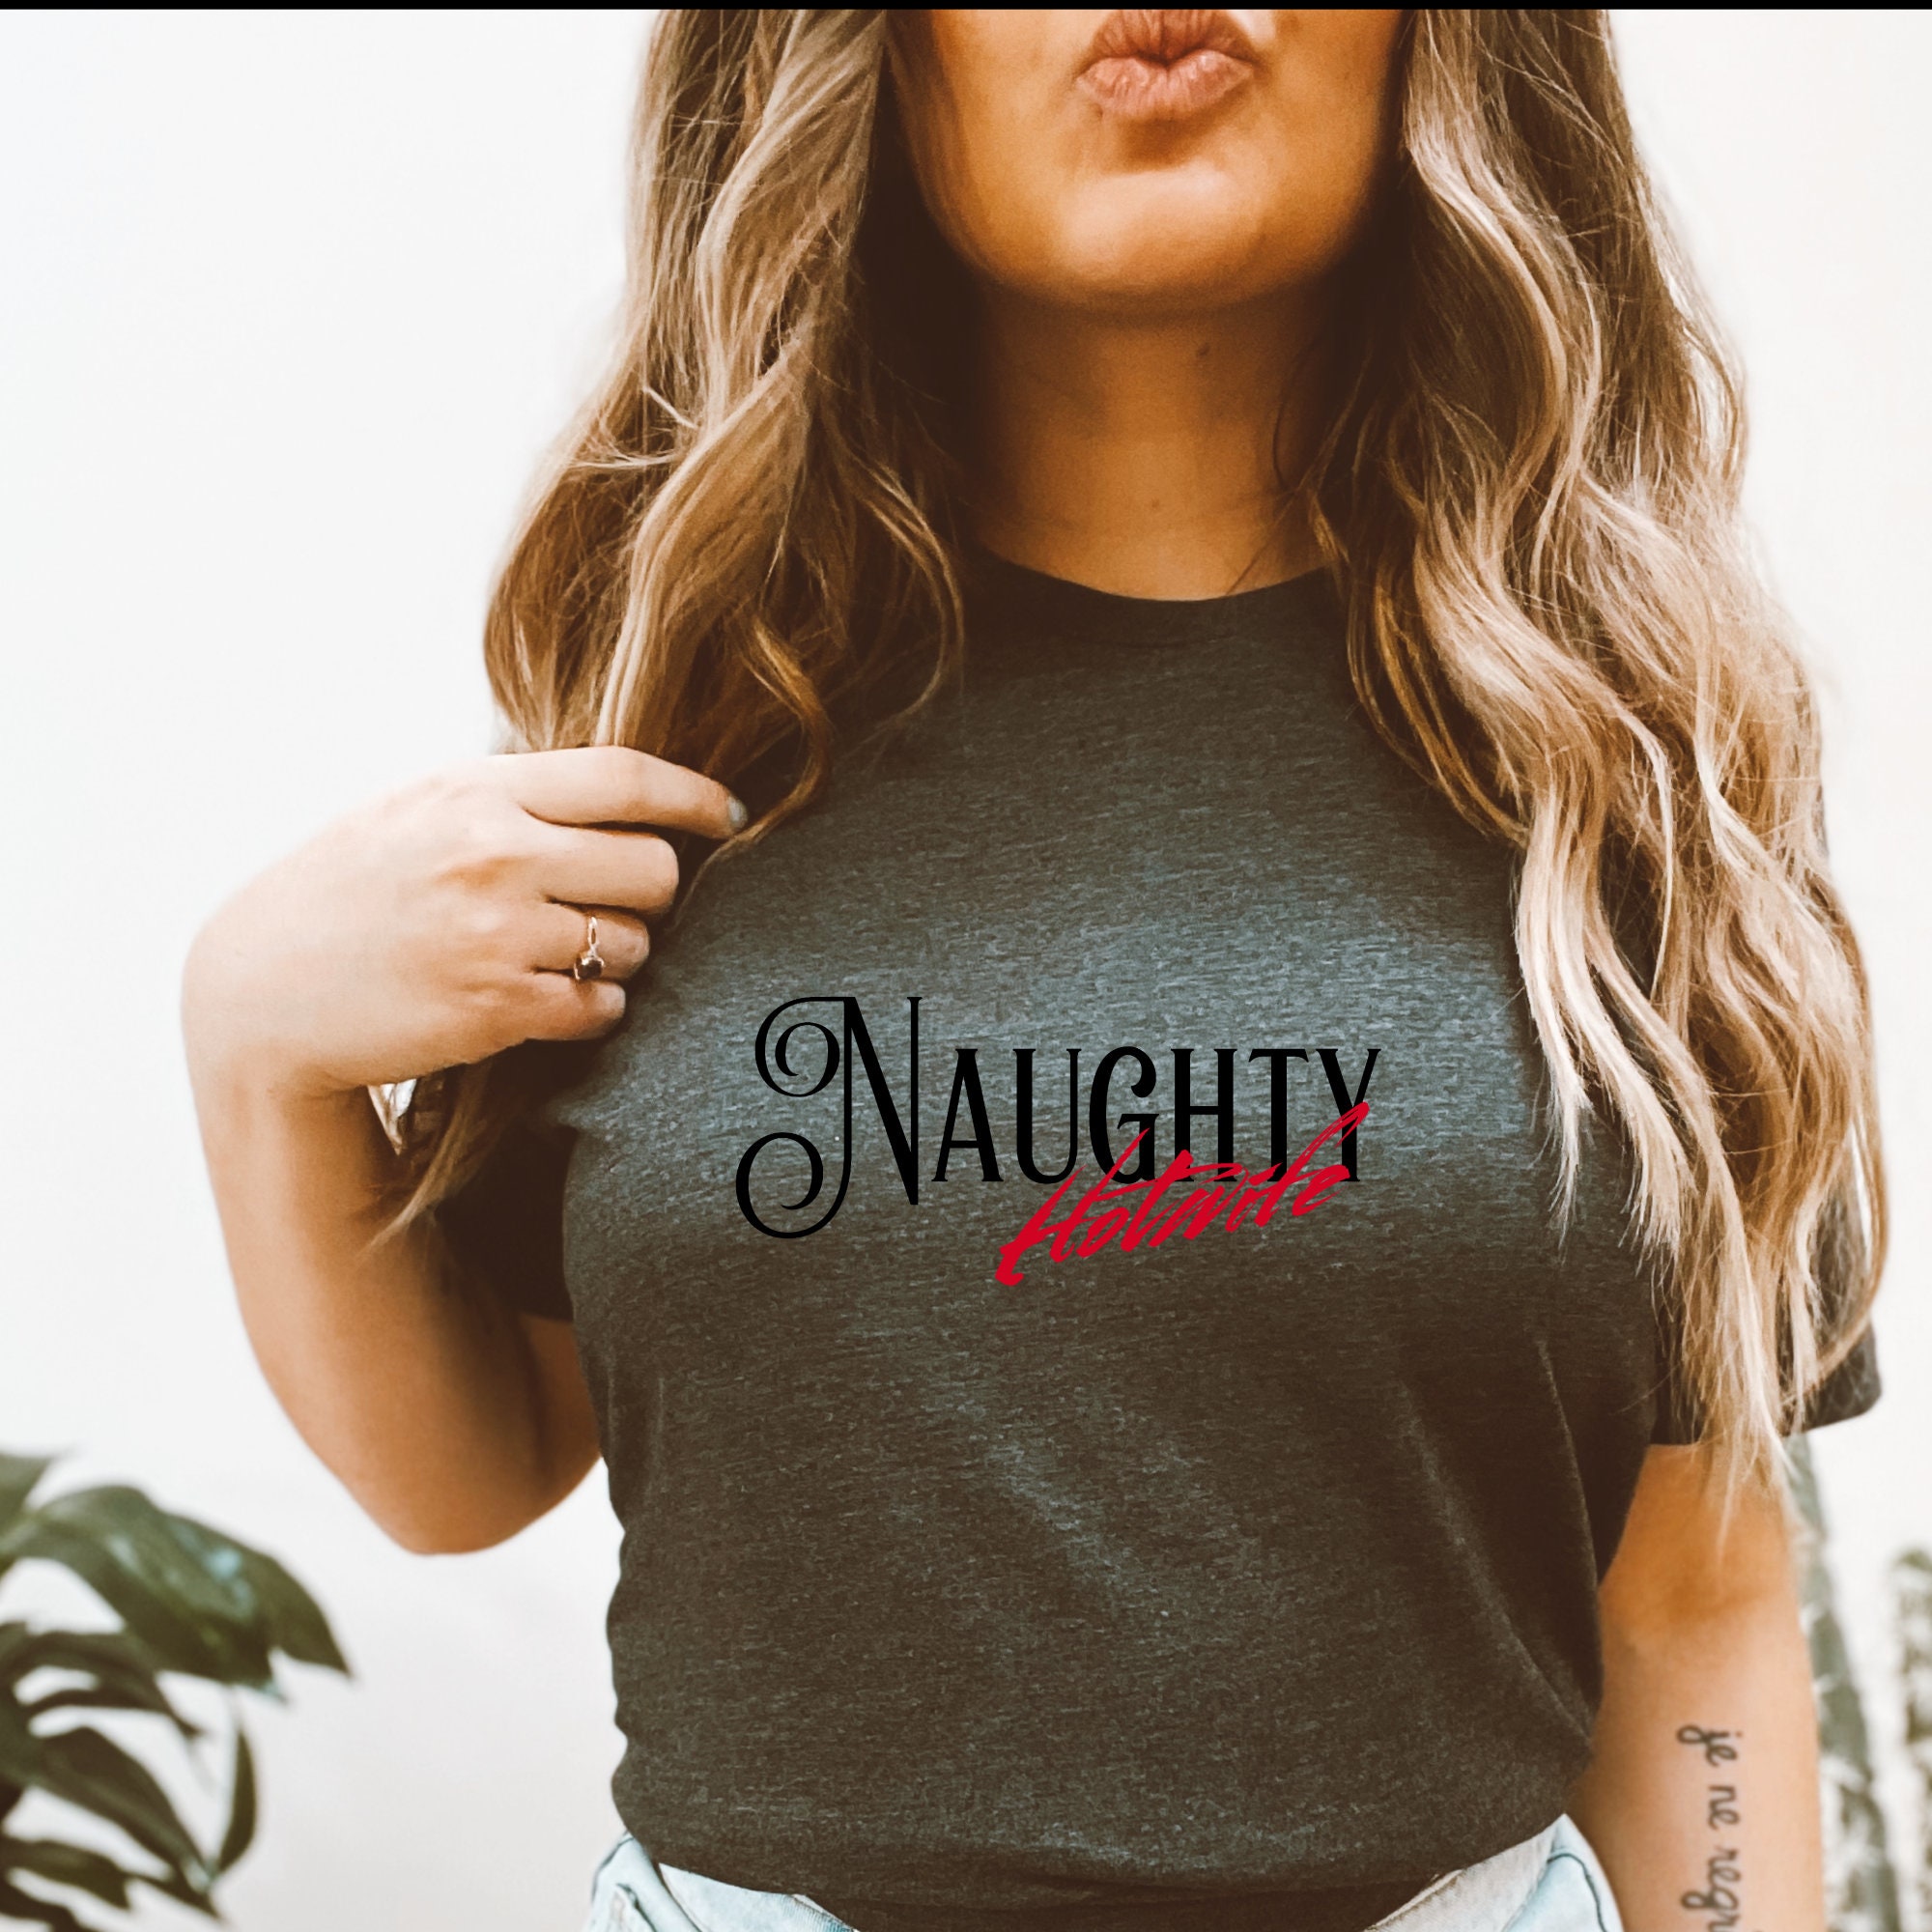 Naughty Hotwife T Shirt Hot Wife Sexy Gifts For Him Horny Get Etsy